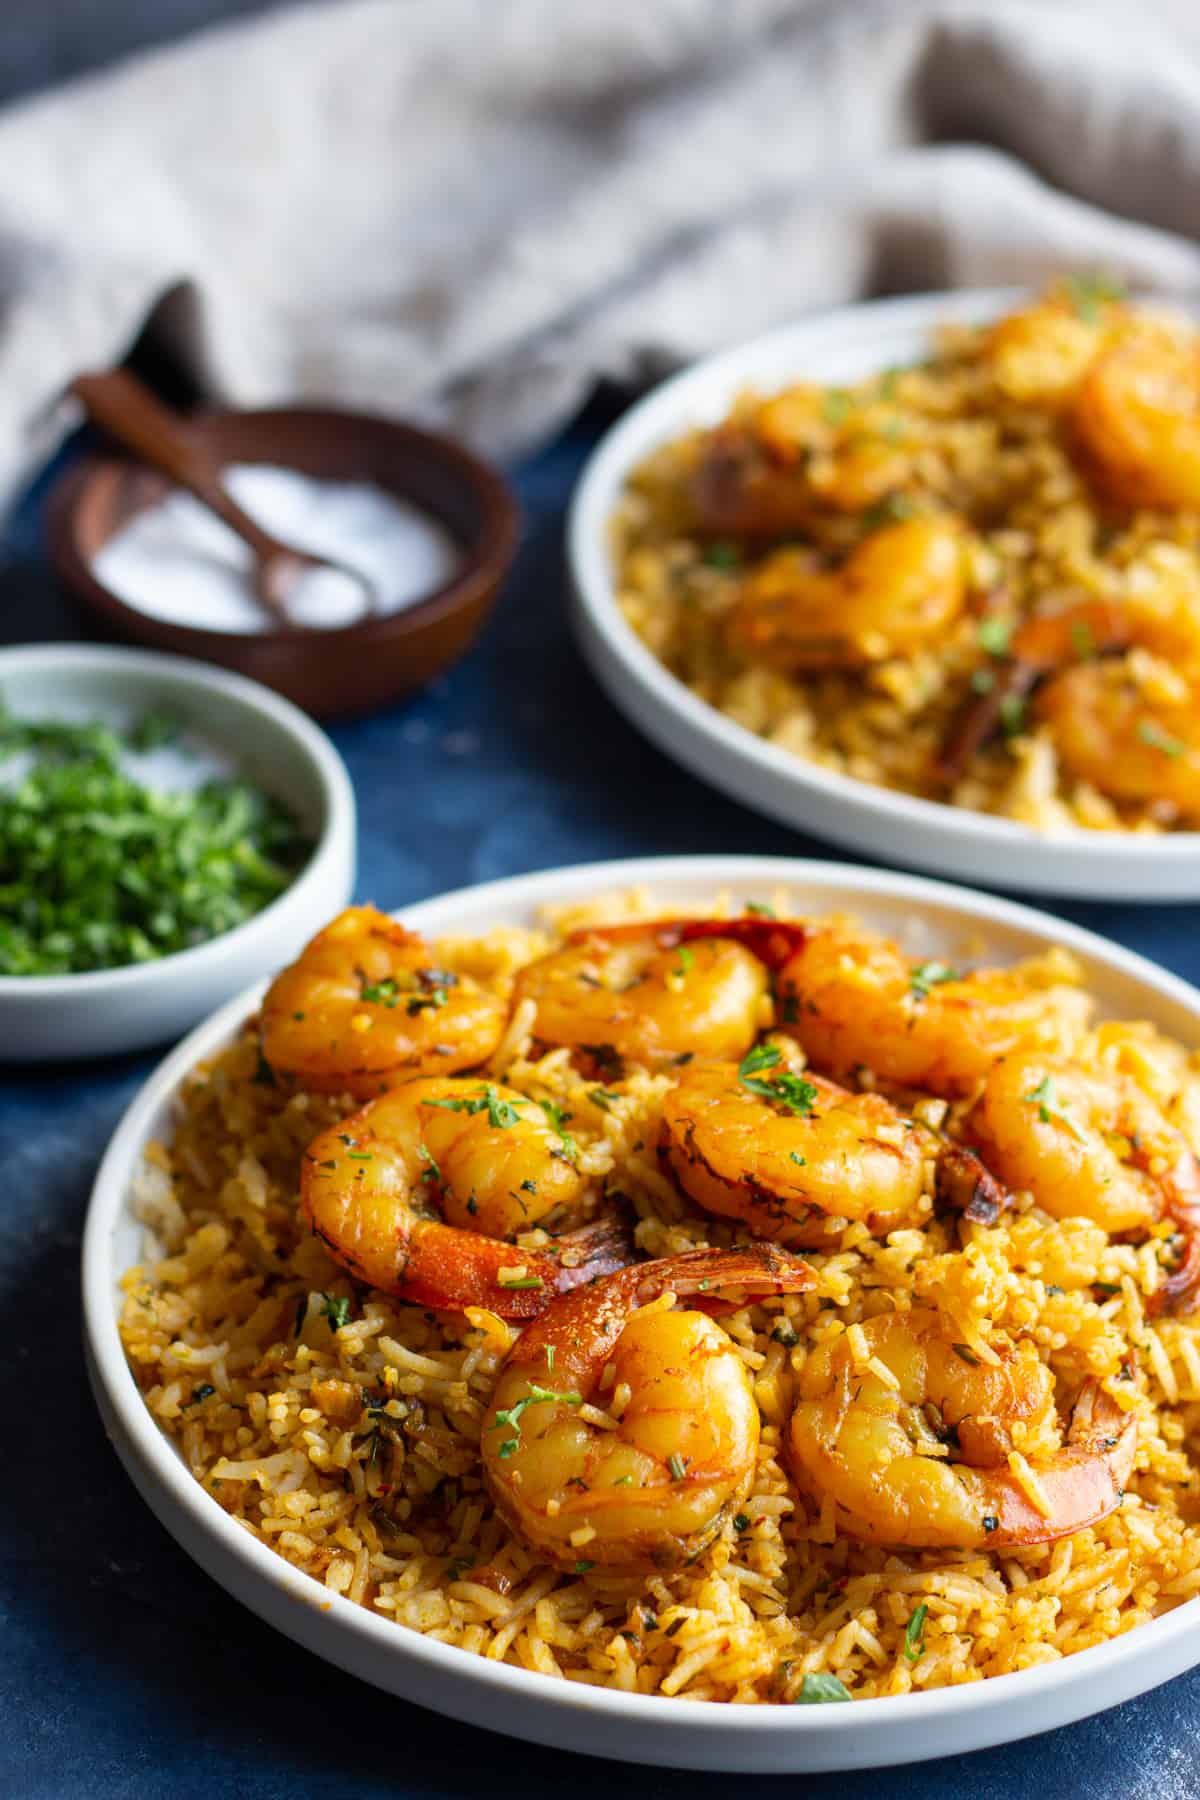 Try the classic combination of shrimp and rice with a Persian twist. This dish is packed with delicious and warm Middle Eastern spices! Master this recipe by watching our video and step-by-step tutorial.
